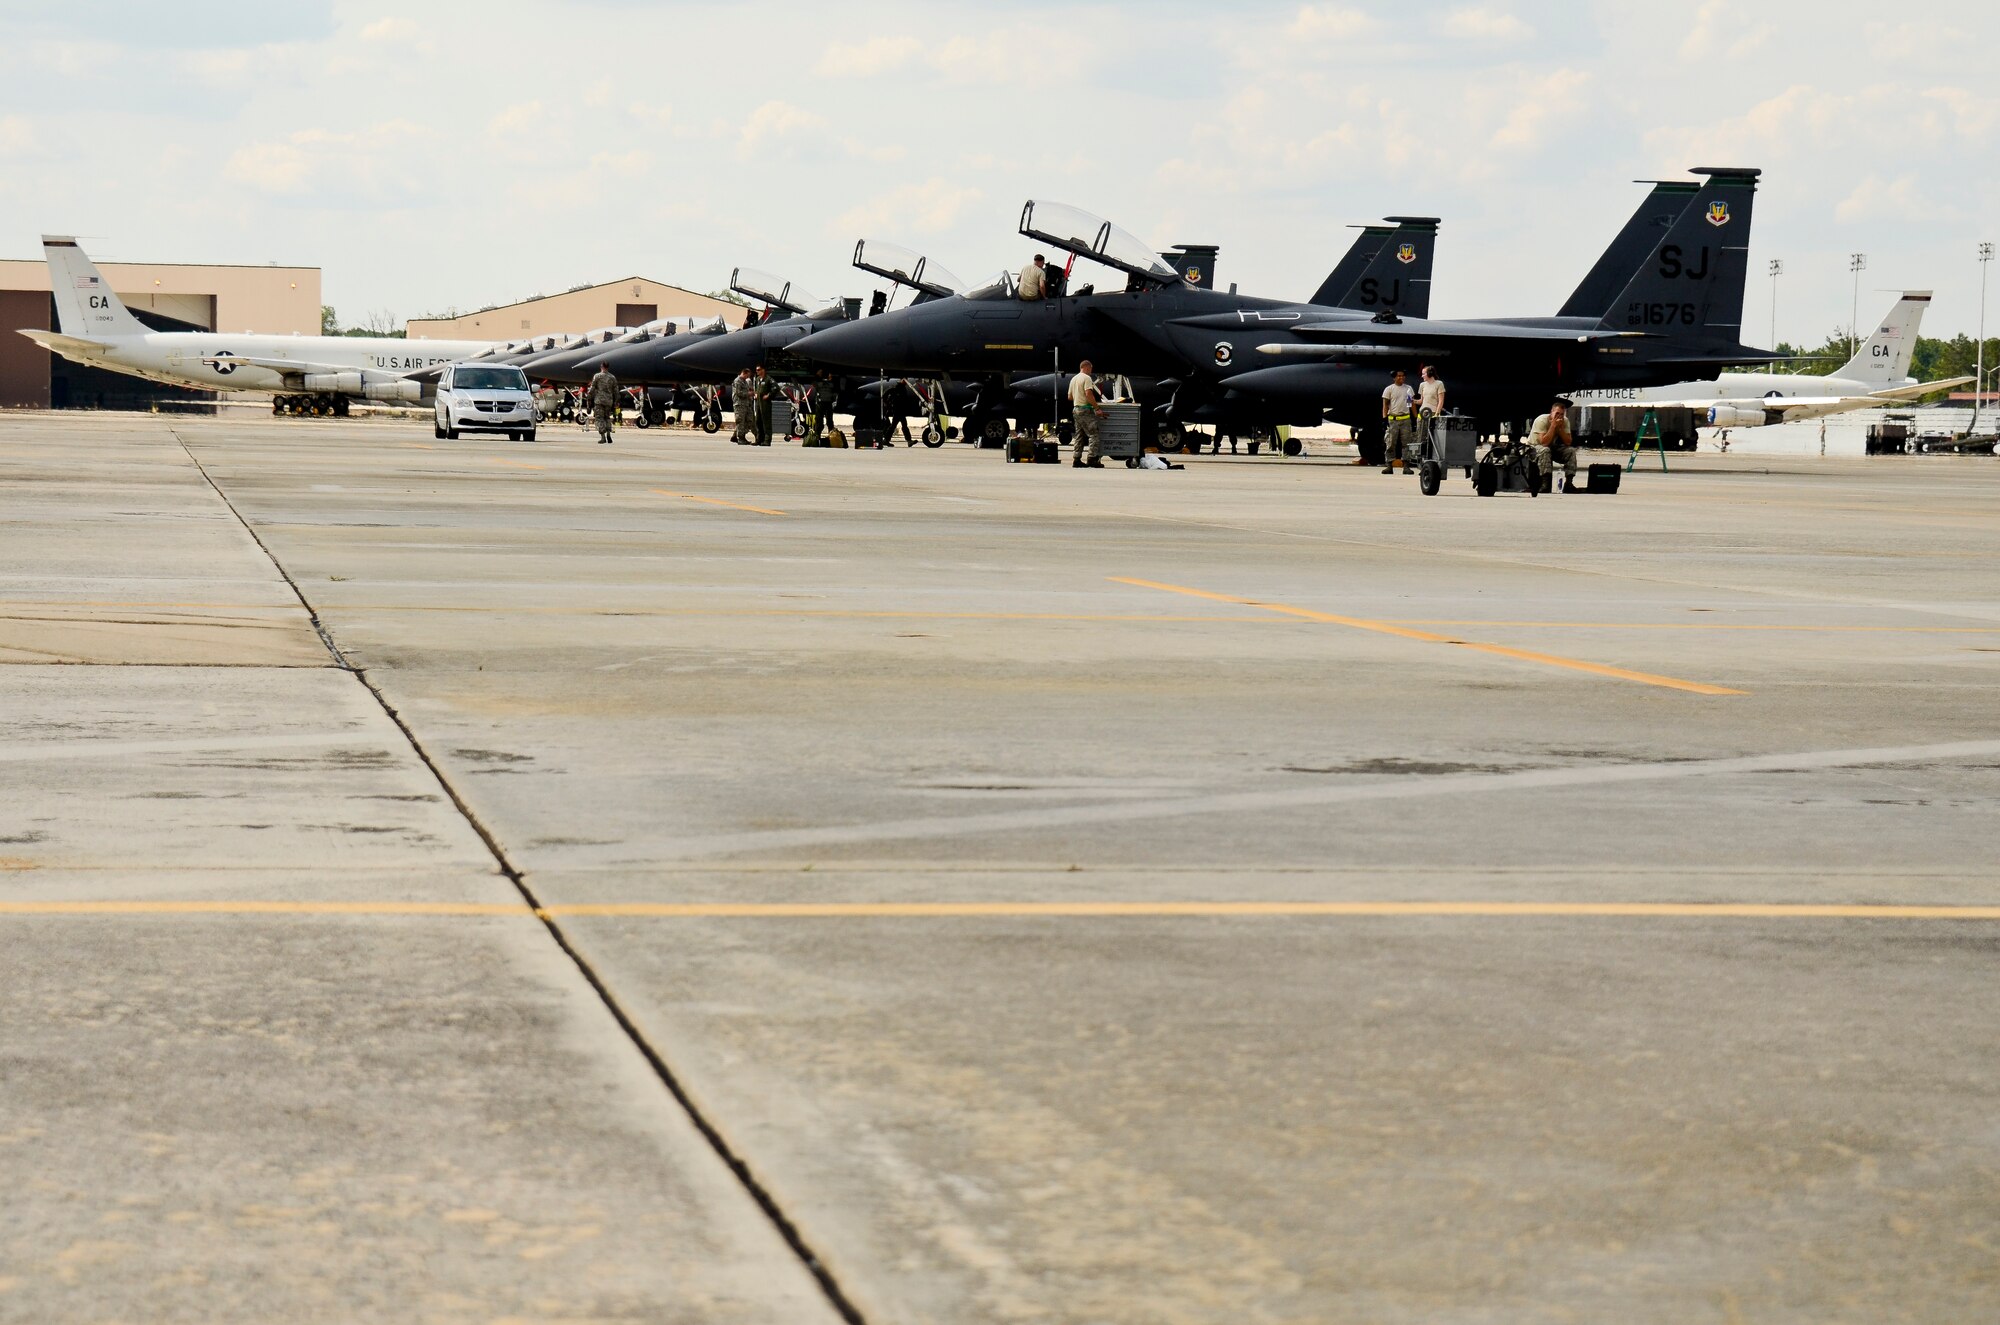 F-15E Strike Eagles from Seymour Johnson Air Force Base, N.C. are bedded down by crew chiefs on the flightline at Robins Air Force Base, Ga., June 8, 2012.  The Strike Eagles, sitting next to E-8 Joint STARS, were at Robins to participate in the JSTARS hosted Iron Dagger exercise.  (National Guard photo by Master Sgt. Roger Parsons/Released)